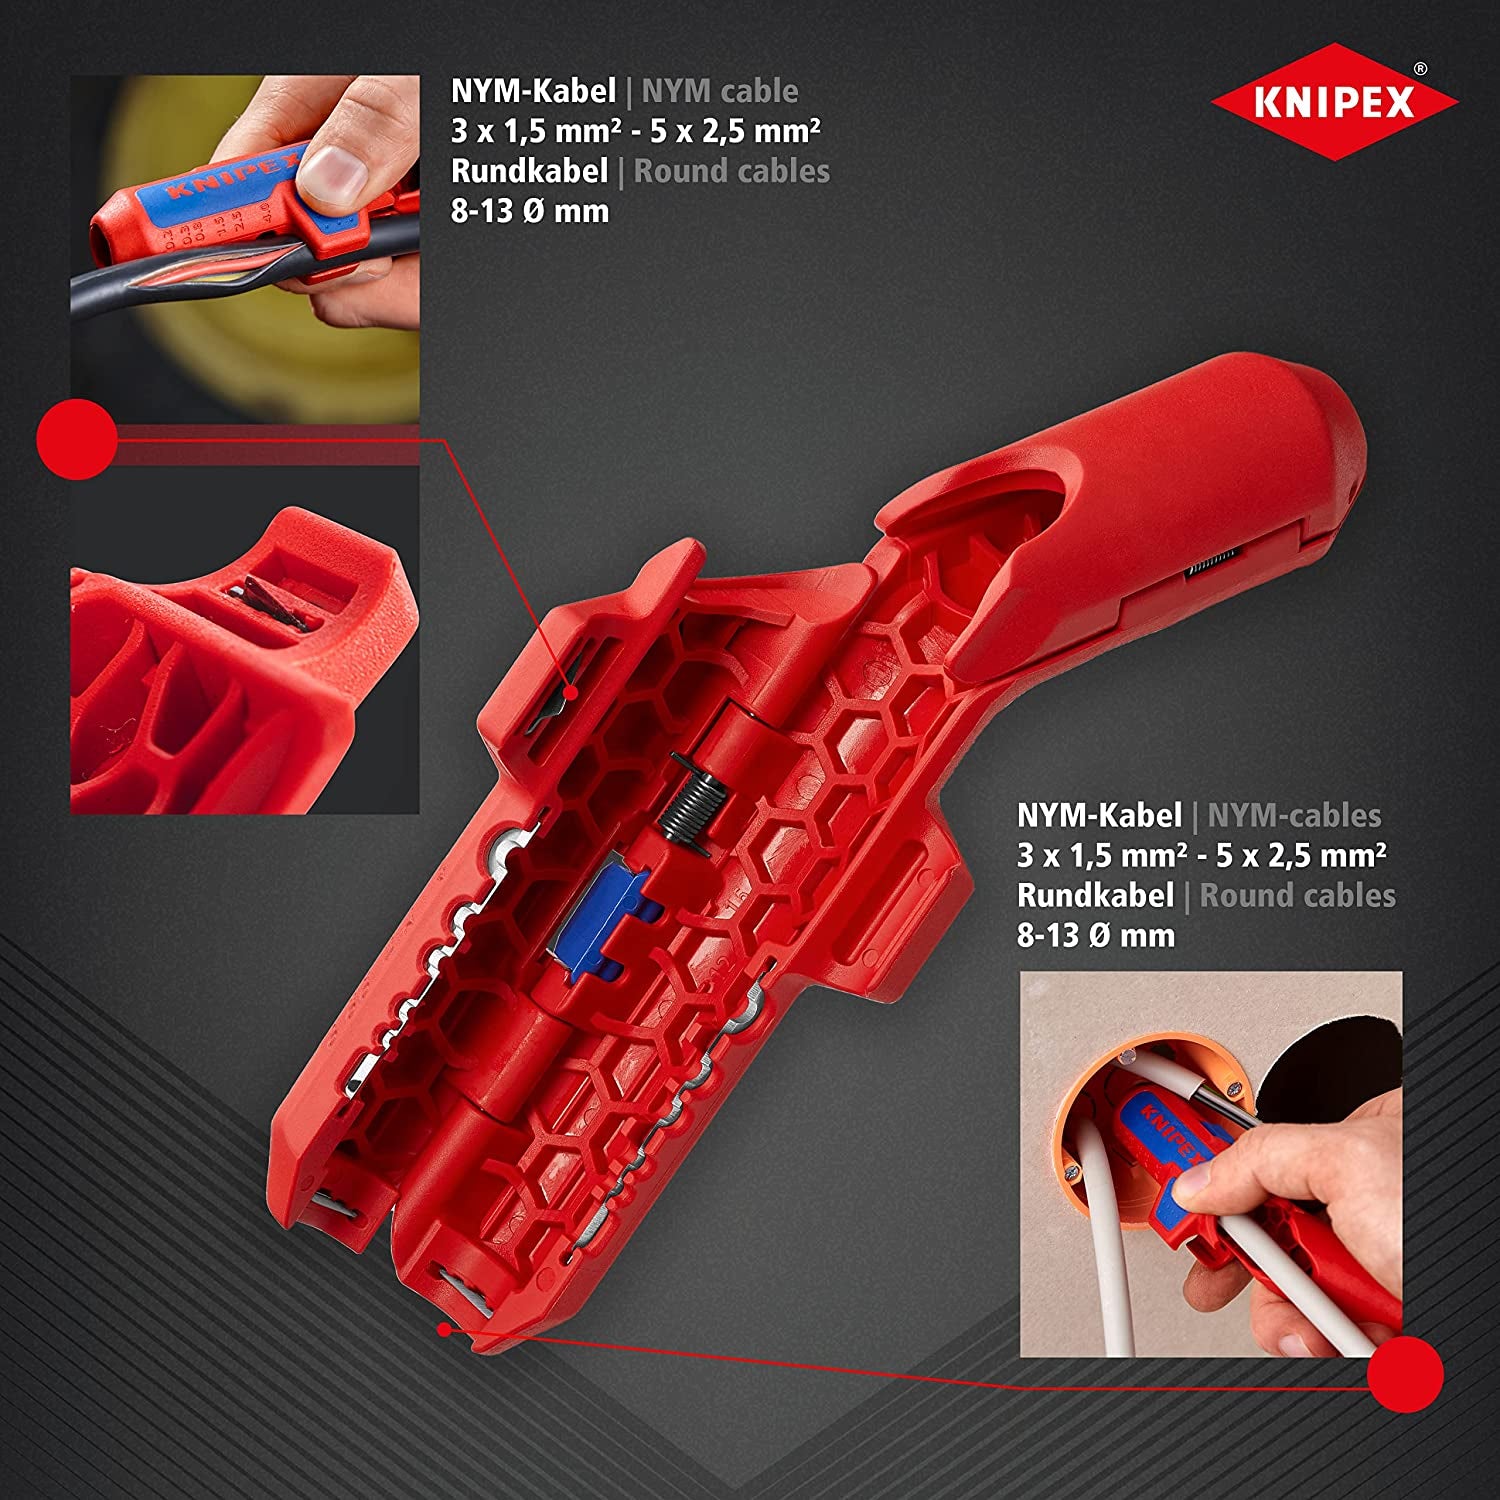 KNIPEX, Knipex 16 95 01 SB Ergostrip Universal Stripping Tool, 135 Mm (Blister Packed)